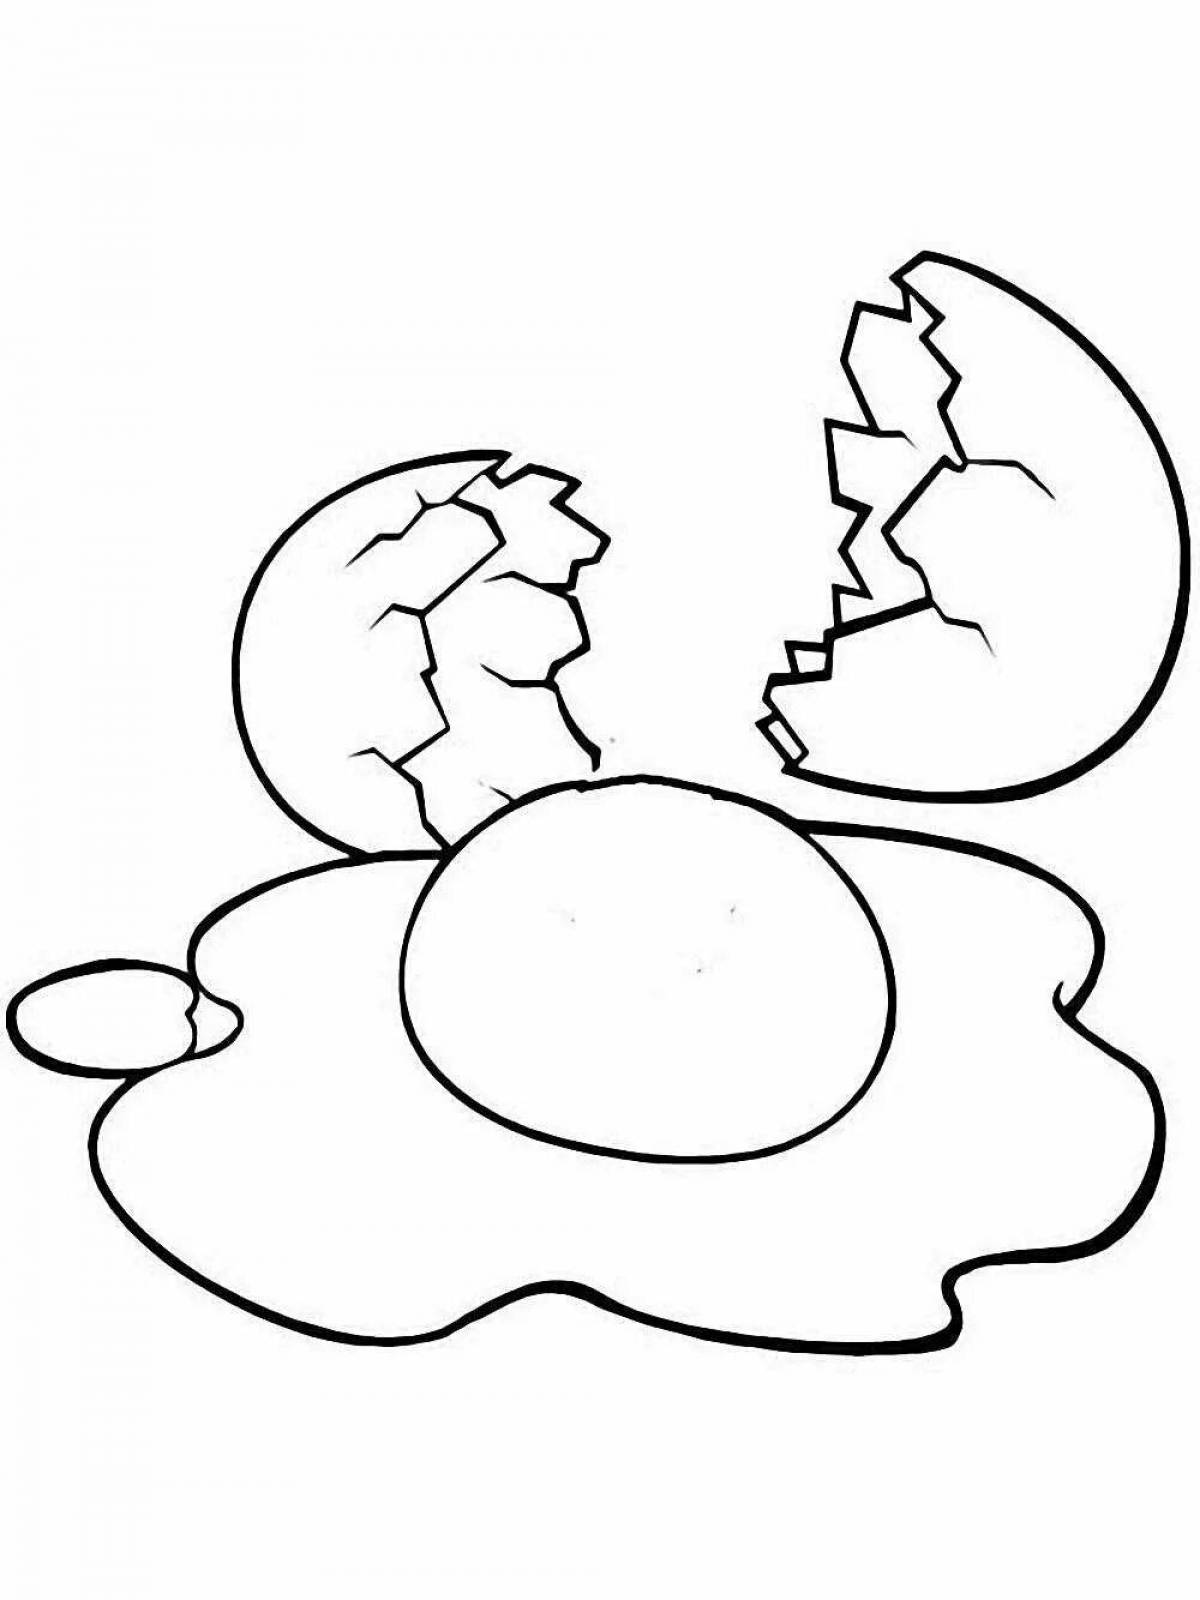 Glowing chicken eggs coloring page